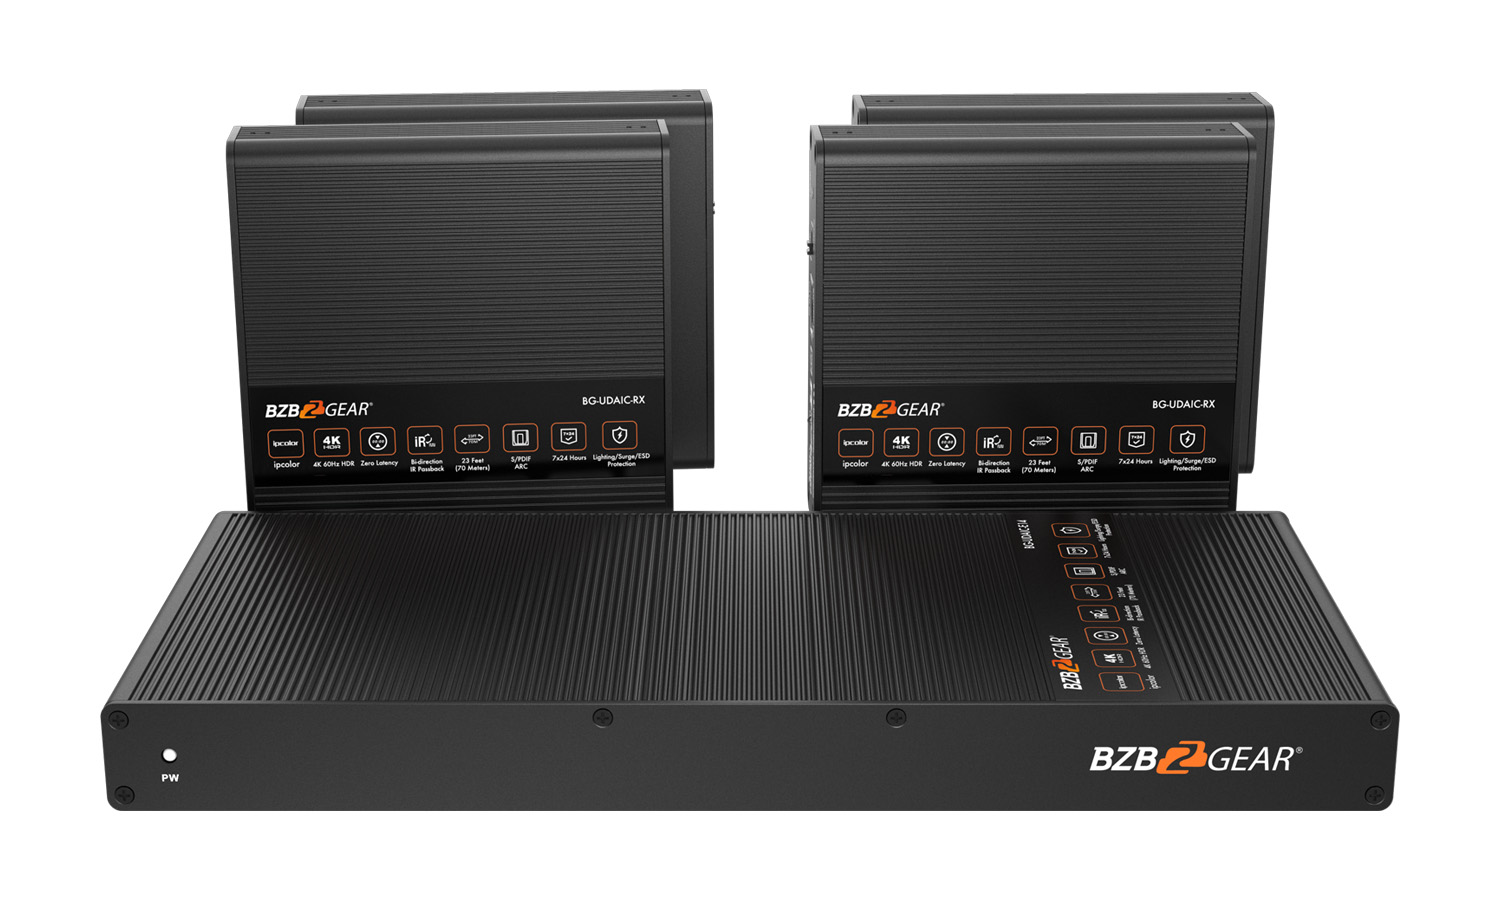 BG-UDAIC-E14 1X4 4K60 UHD 18Gbps HDMI Splitter/Distribution Amplifier up to 230ft over Single Category 5e/6/7 Cable by BZBGEAR